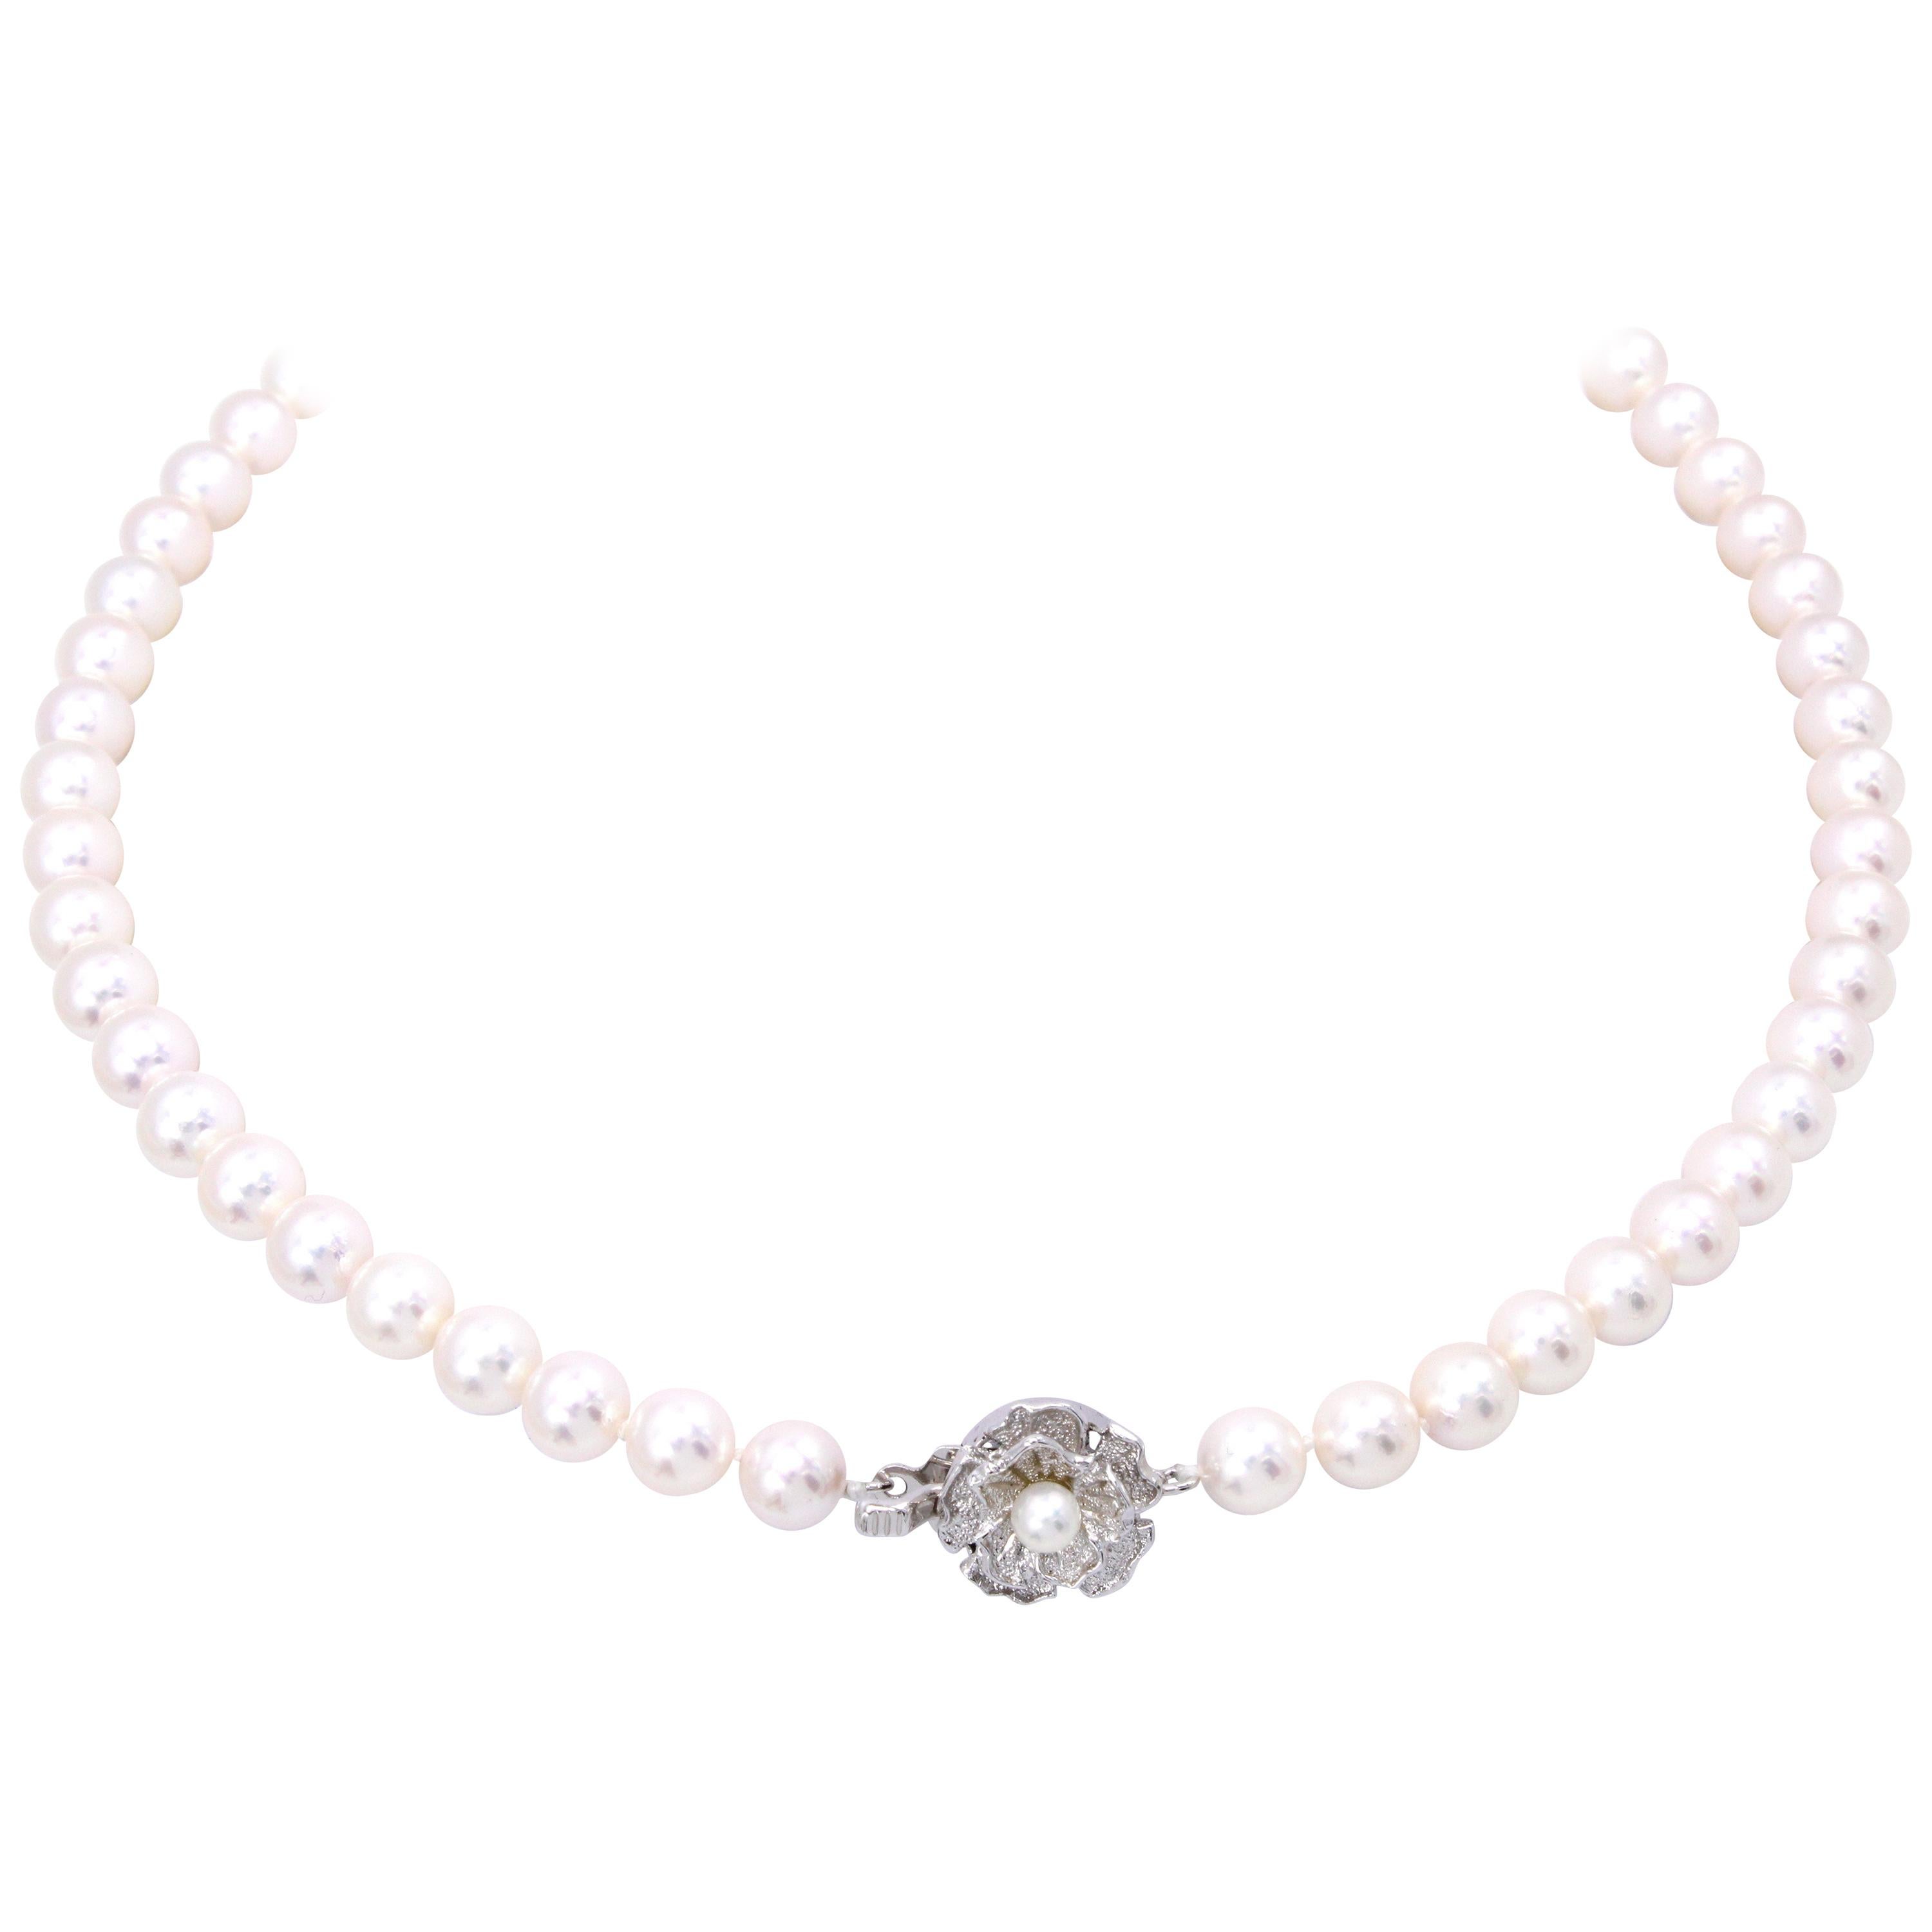 Strand of Fine Akoya Pearl Necklace